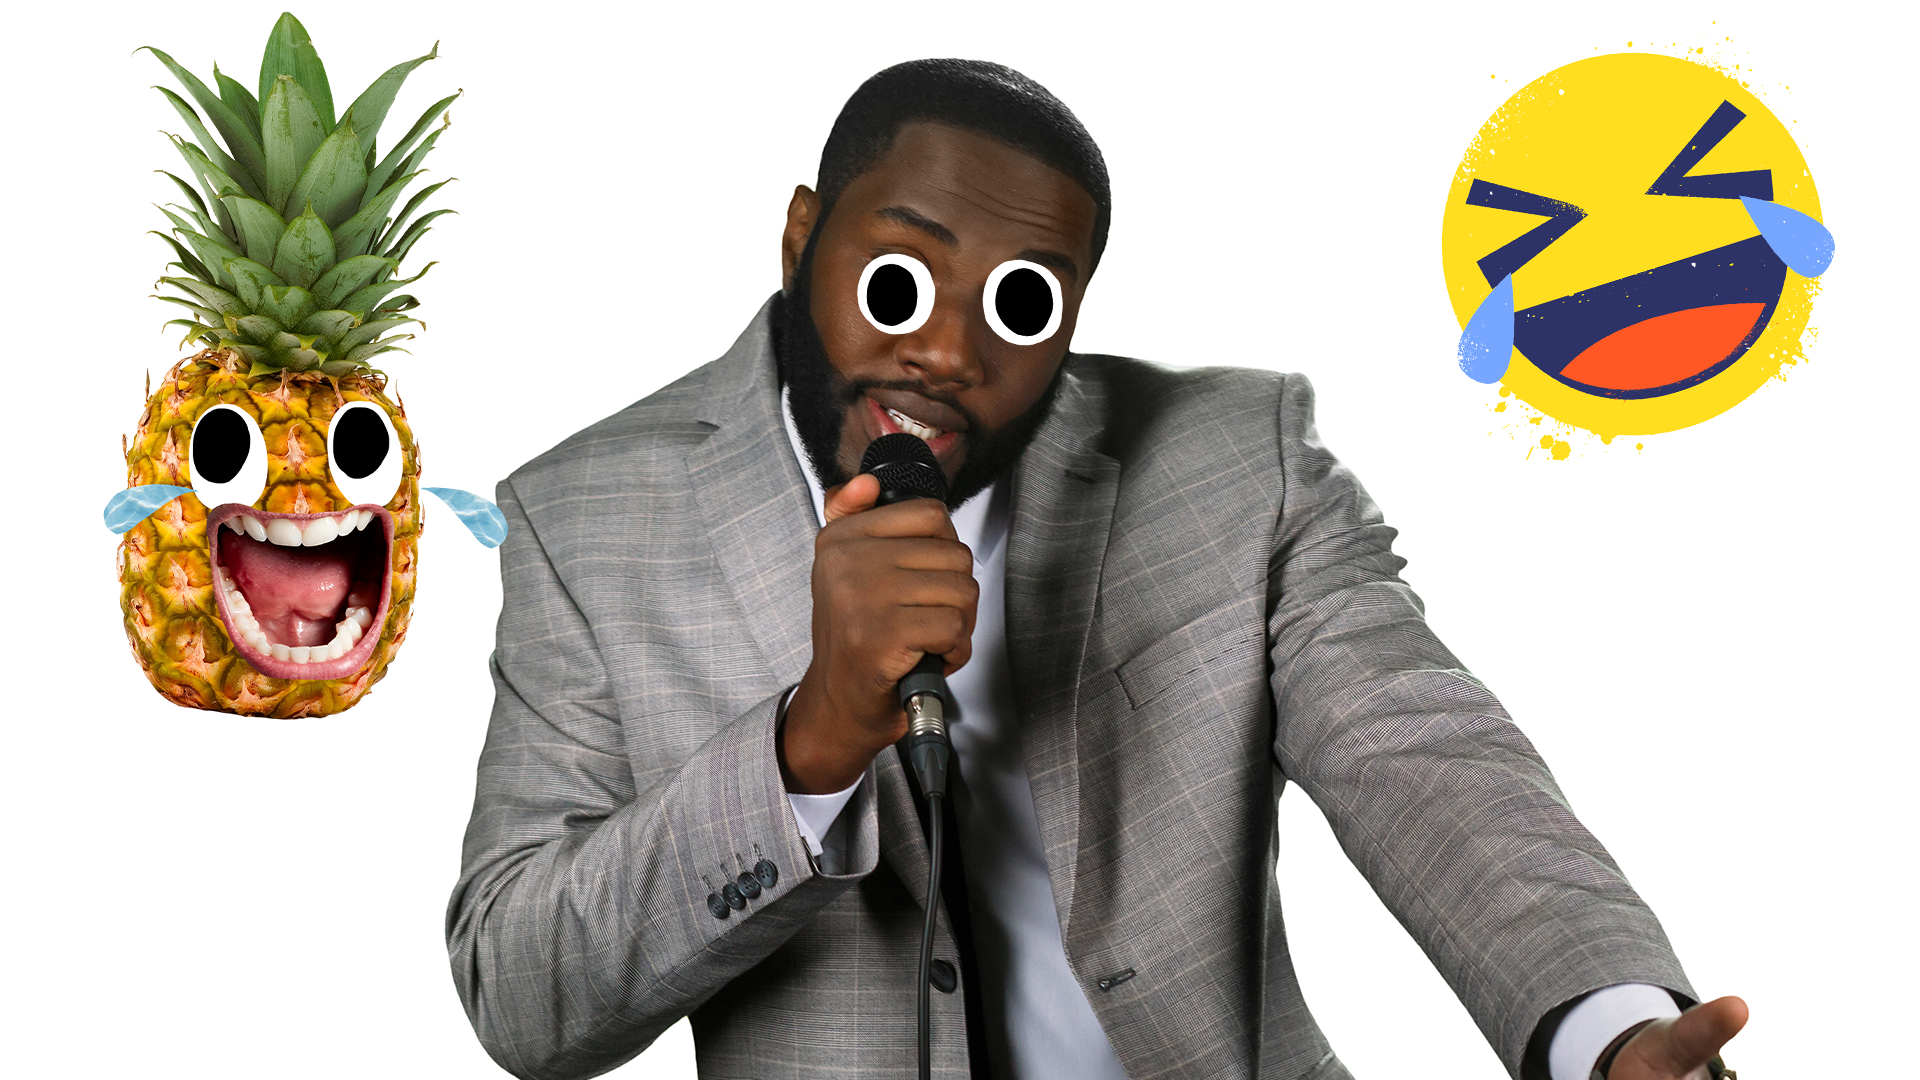 Stand-up comedian on white background with pineapple and laugh emoji